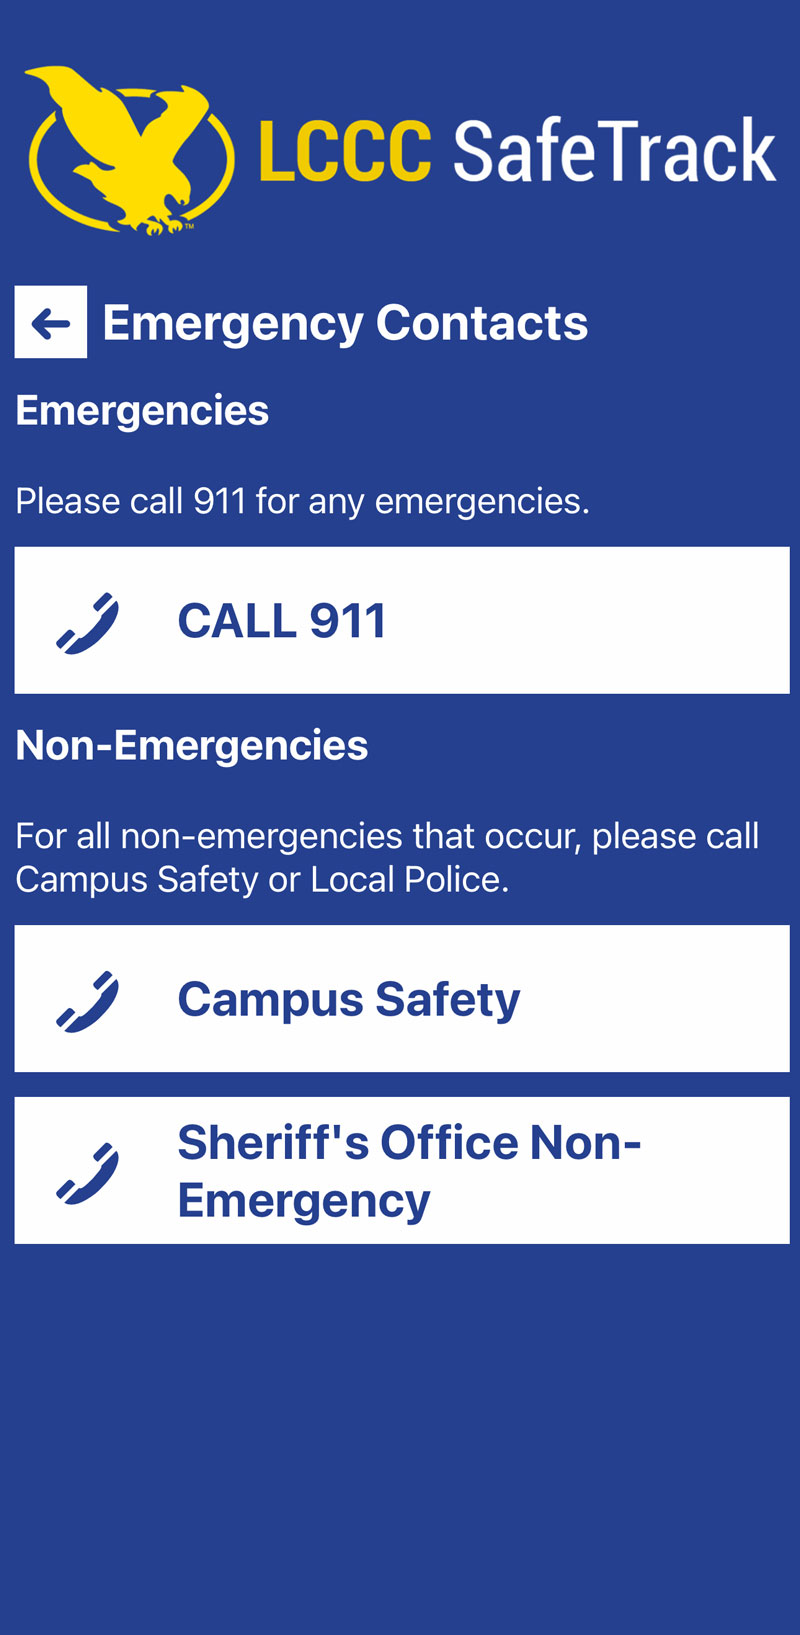 Screenshot of app with Emergency Contacts page showing